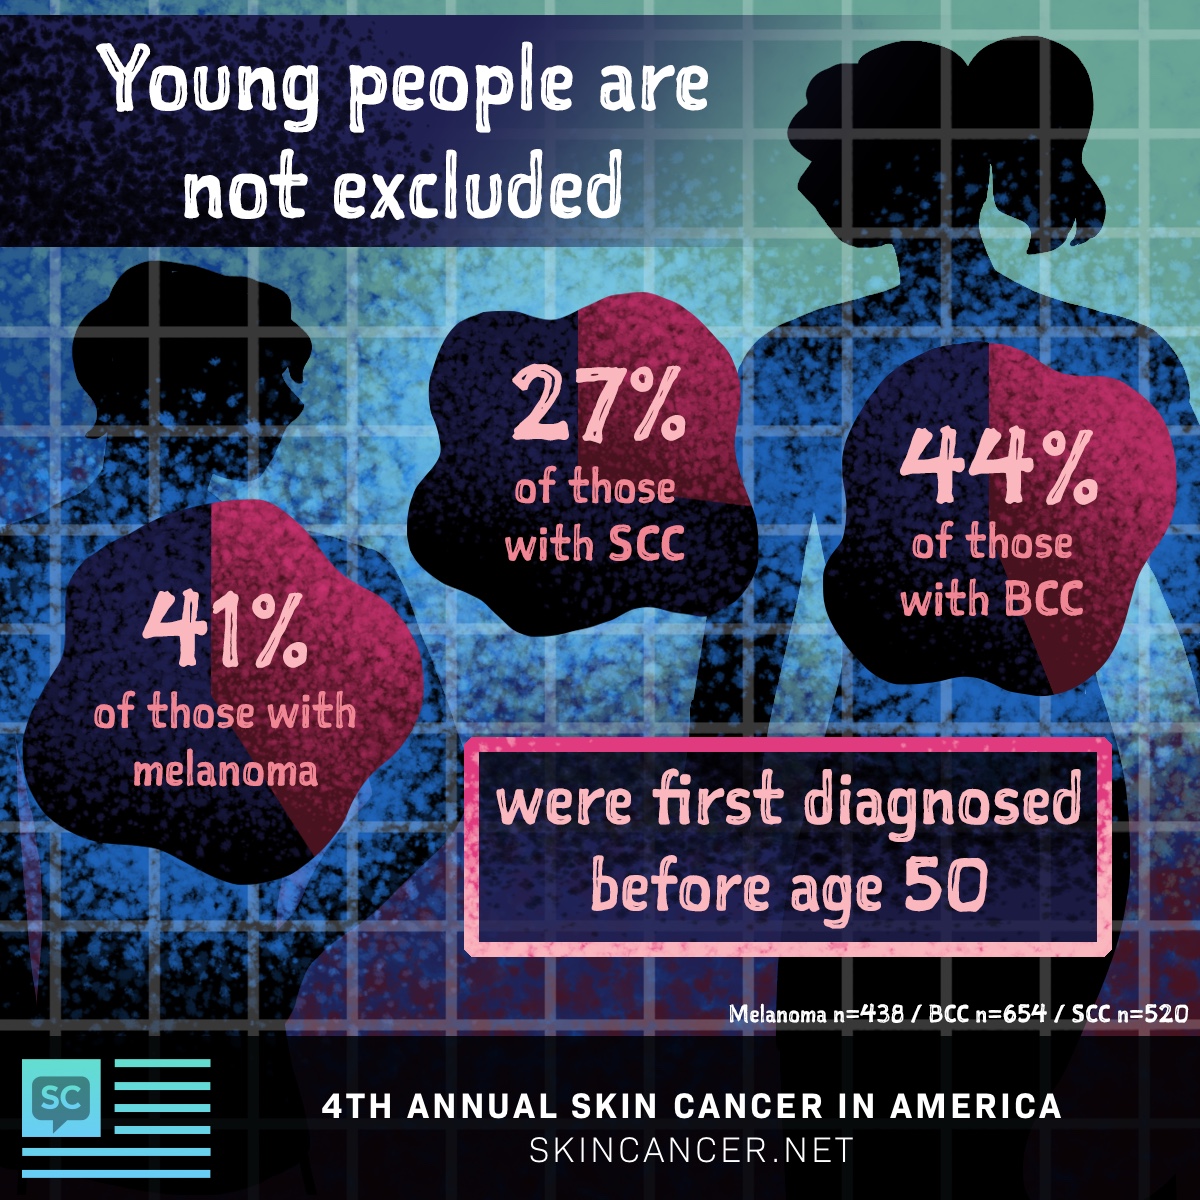 SkinCancer.net 2020 In America survey results, 41% of melanoma respondents were first diagnosed before age 50.